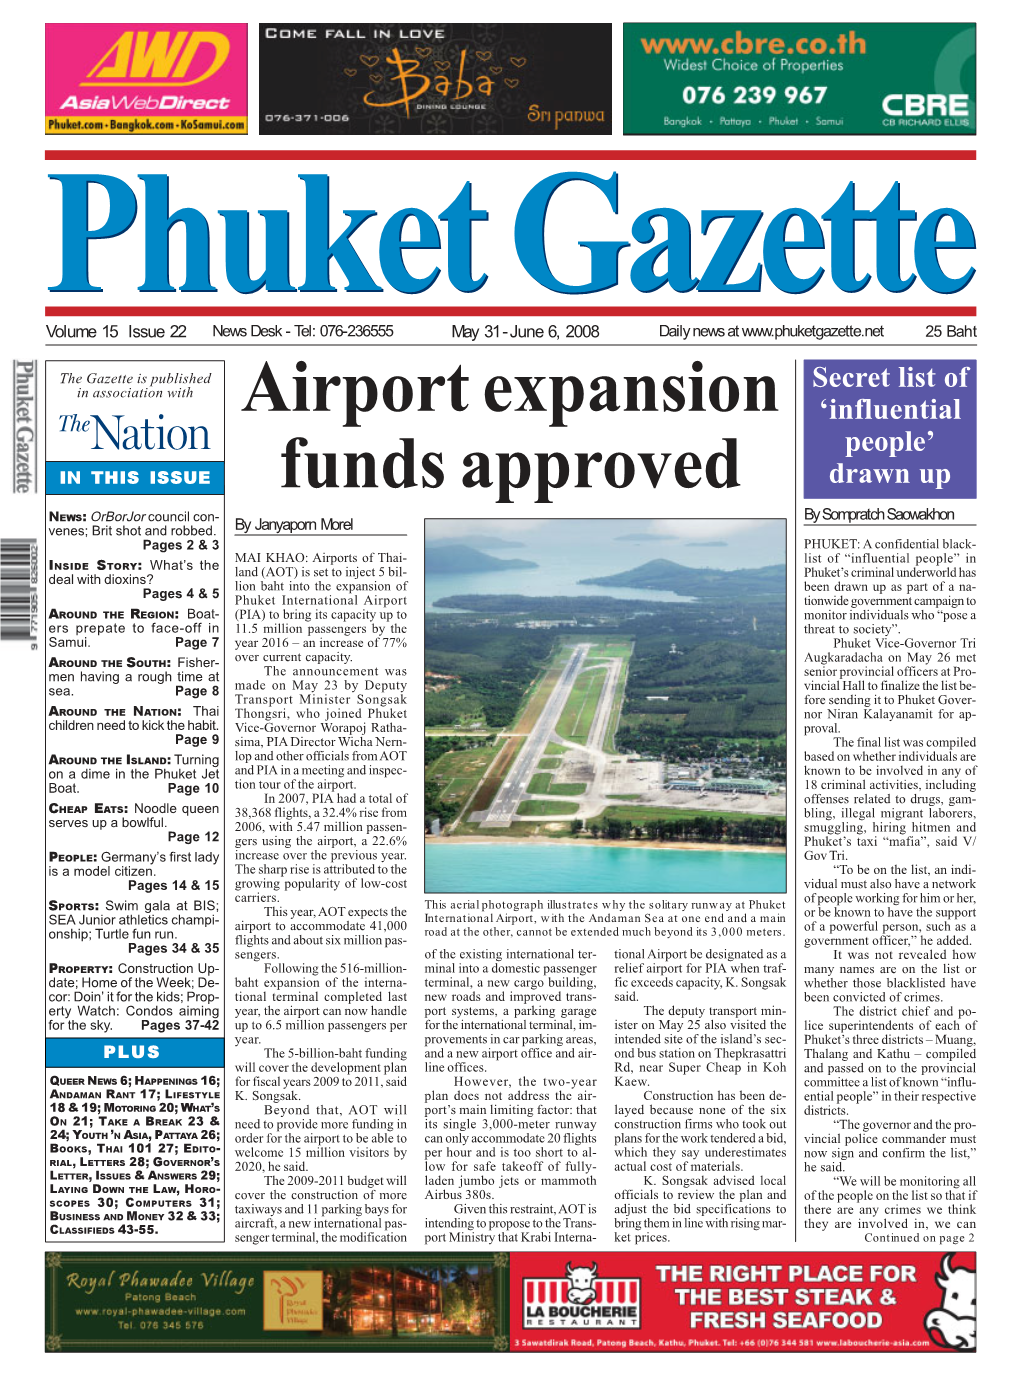 Airport Expansion Funds Approved